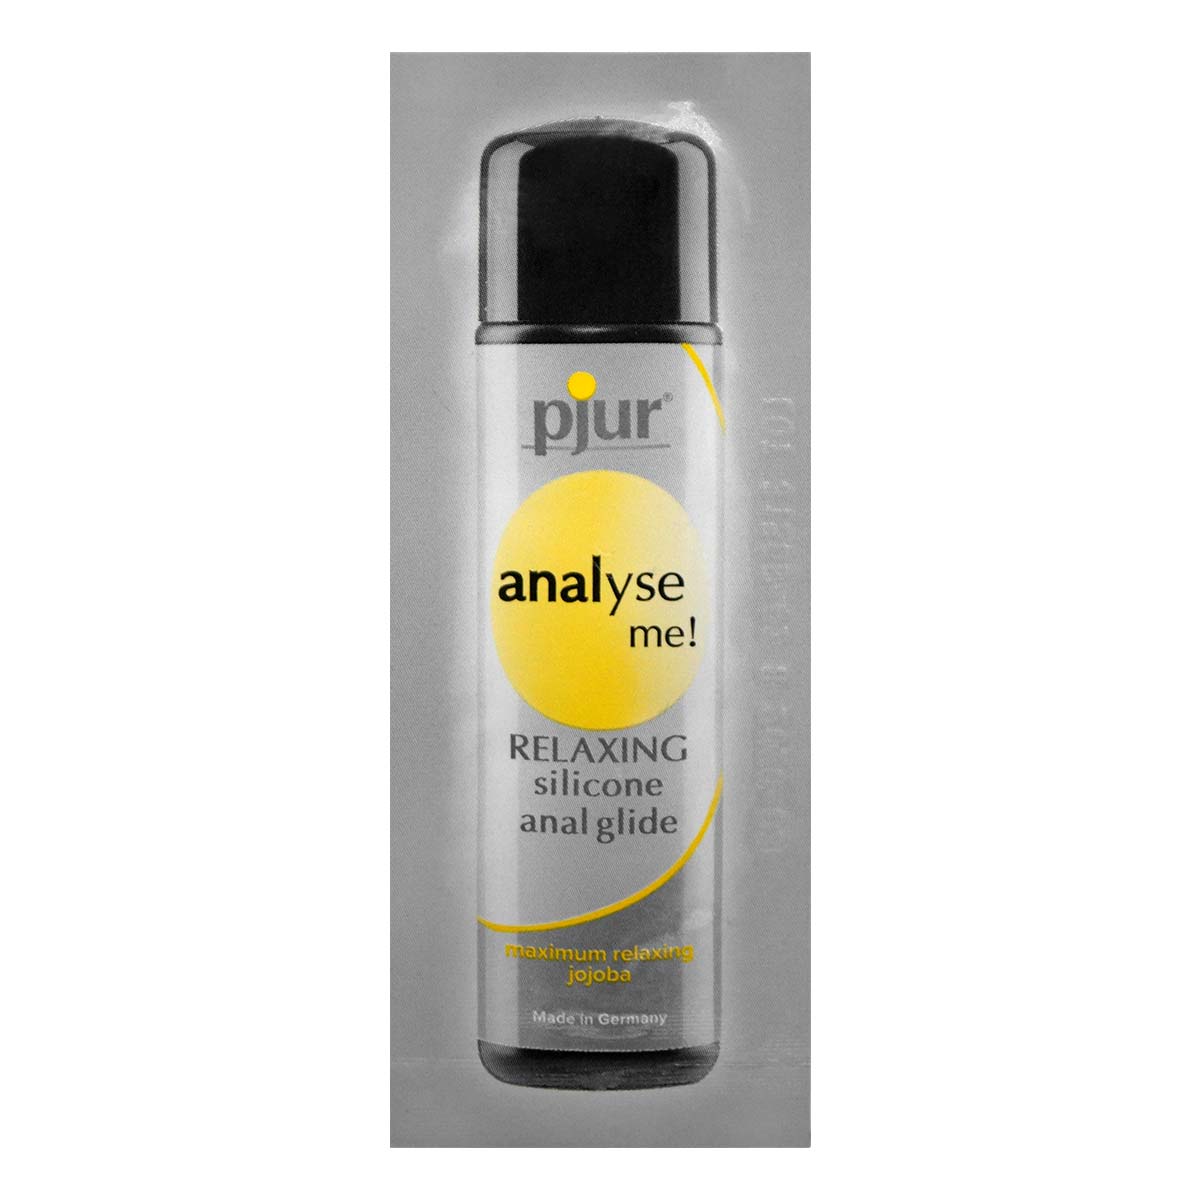 pjur analyse me! RELAXING Silicone Anal Glide 1.5ml Silicone-based Lubricant-p_2